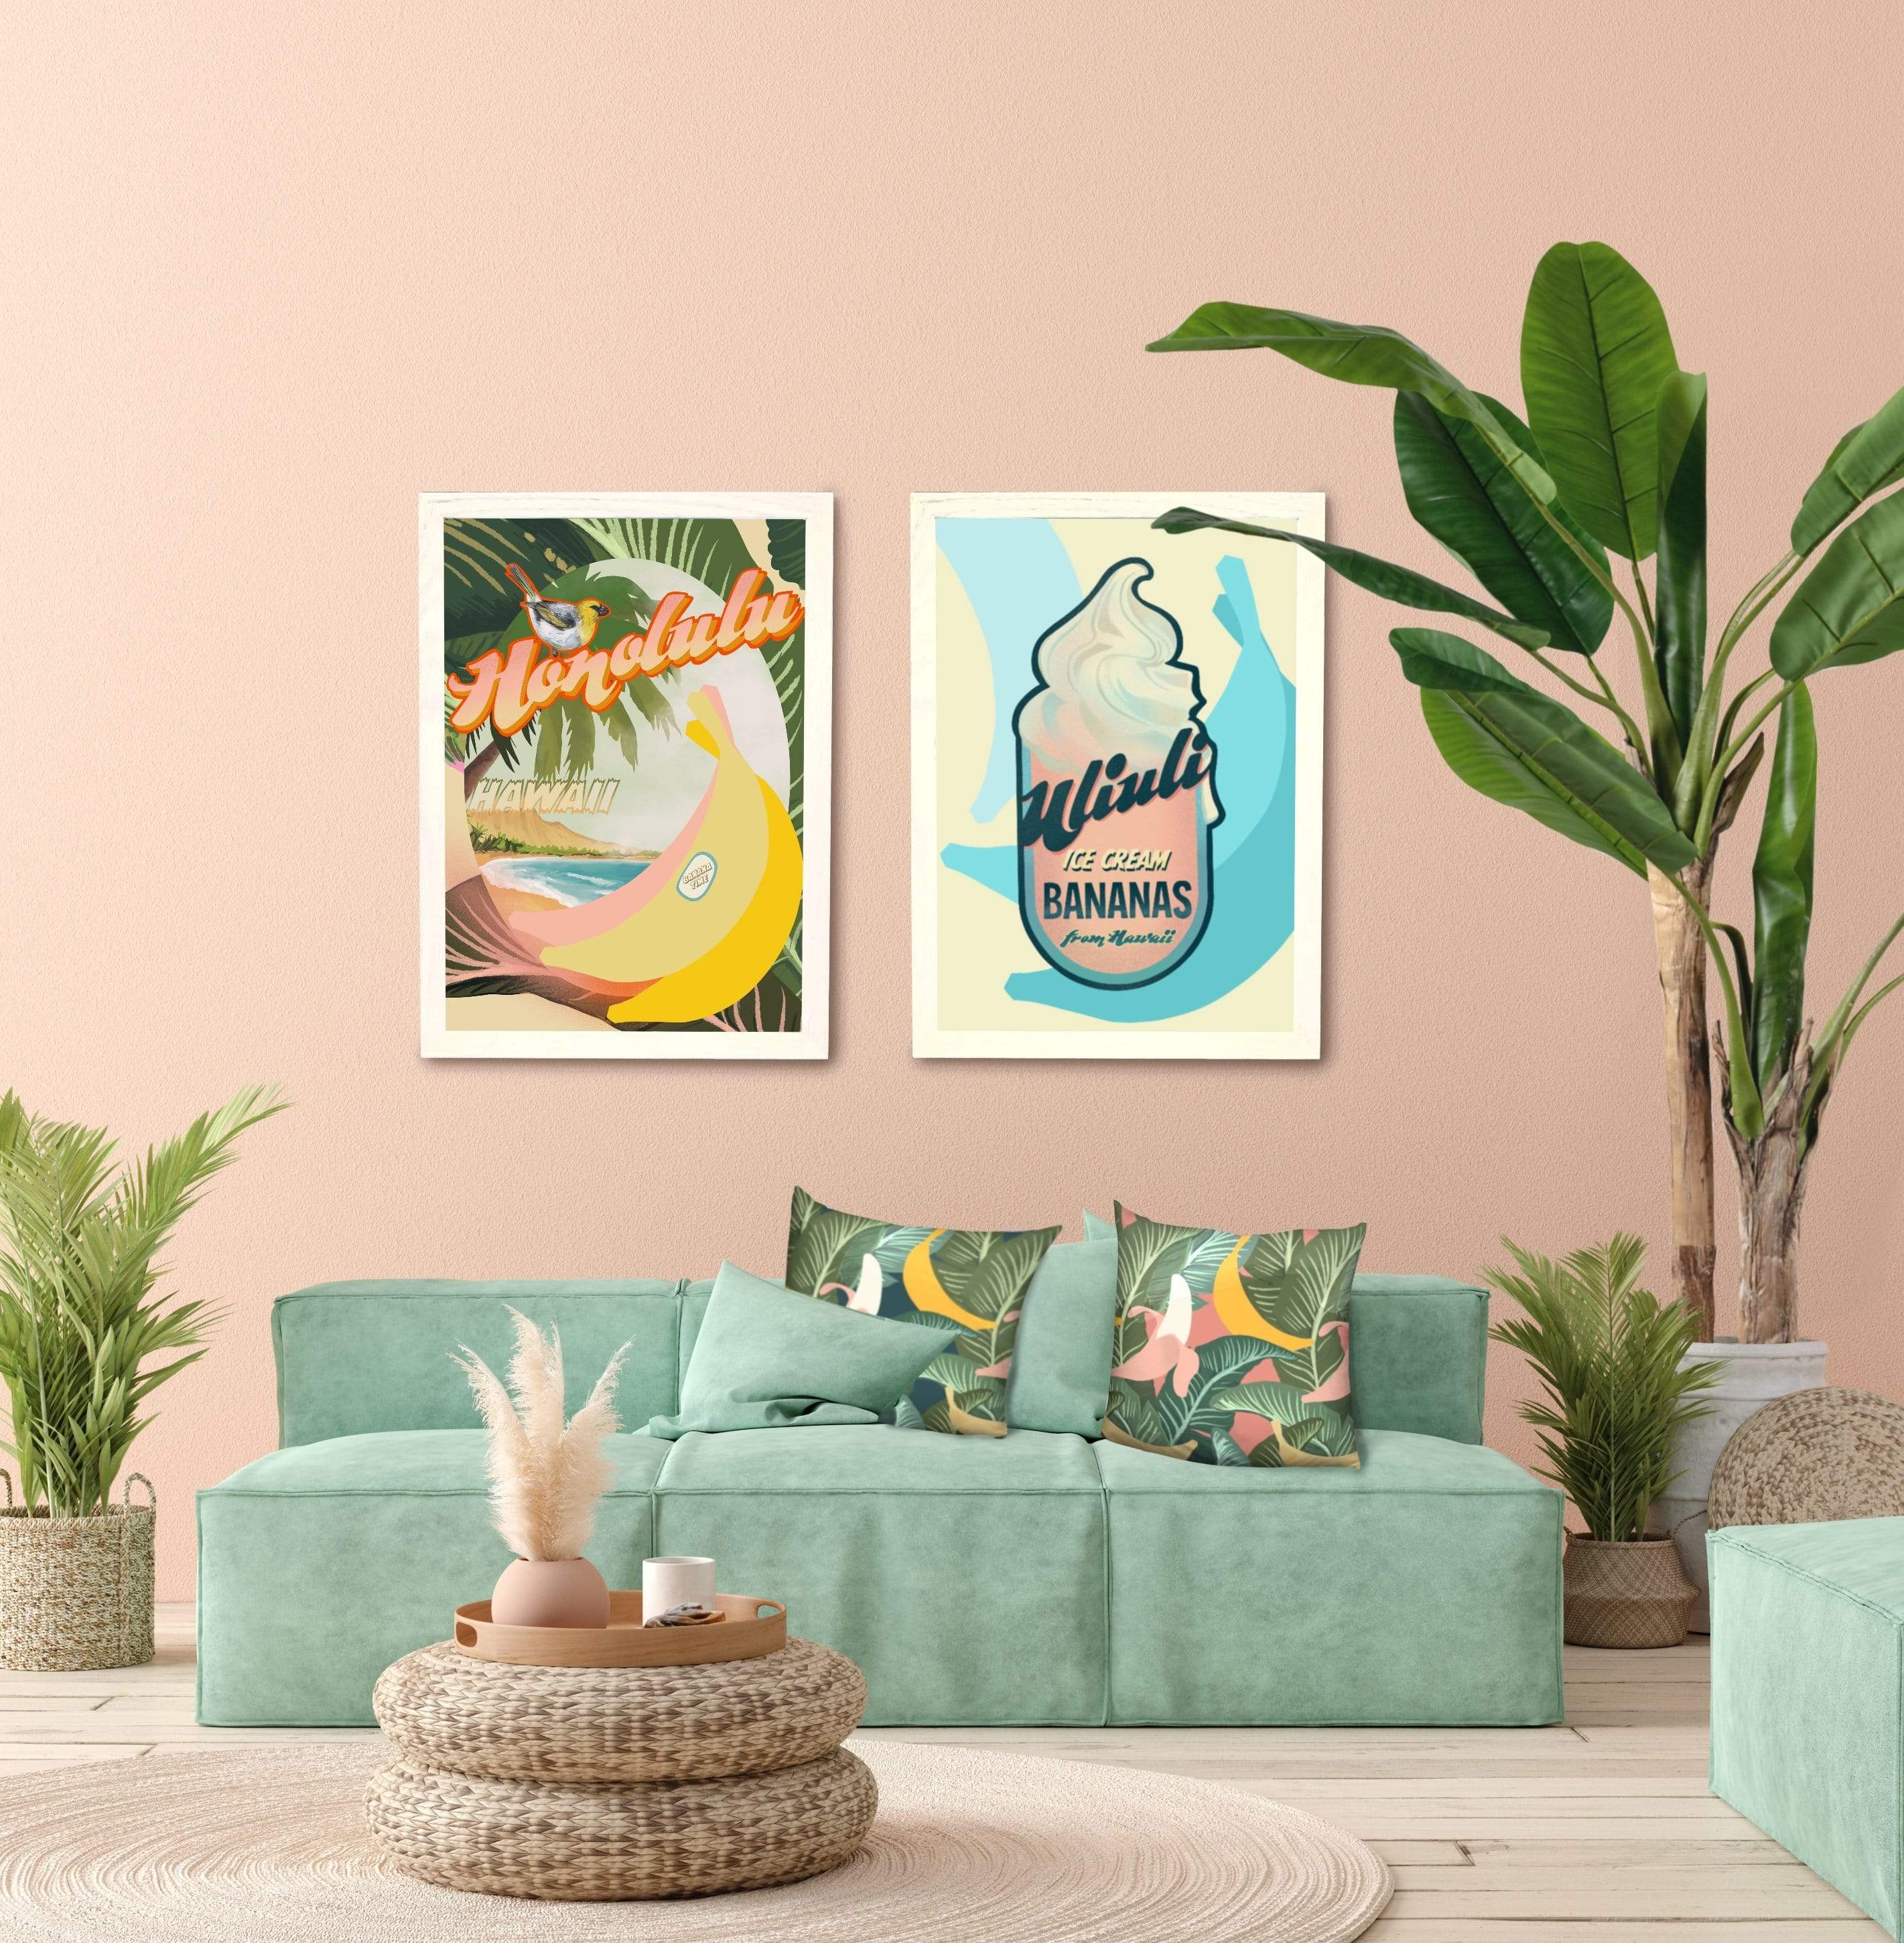 50's wall art with plants and a sofa